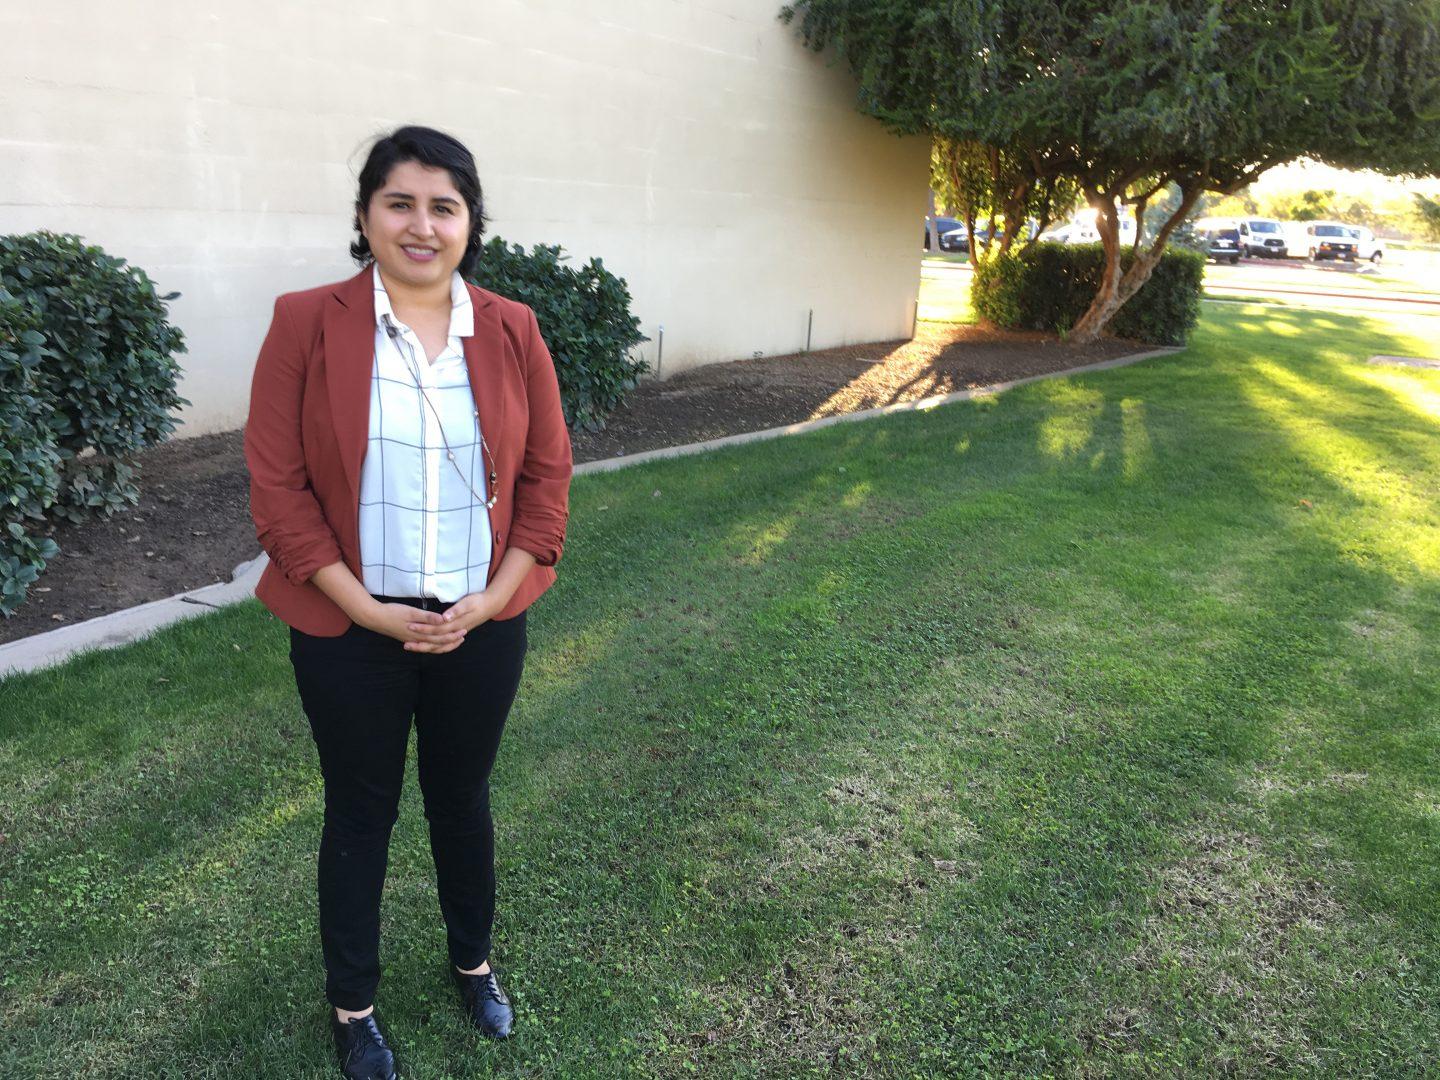 Elisa Oceguera, a doctoral student at UC Davis, produced a digital storytelling project to tell stories of LGBTQ farmworkers in California. (Cresencio Rodriguez/The Collegian)